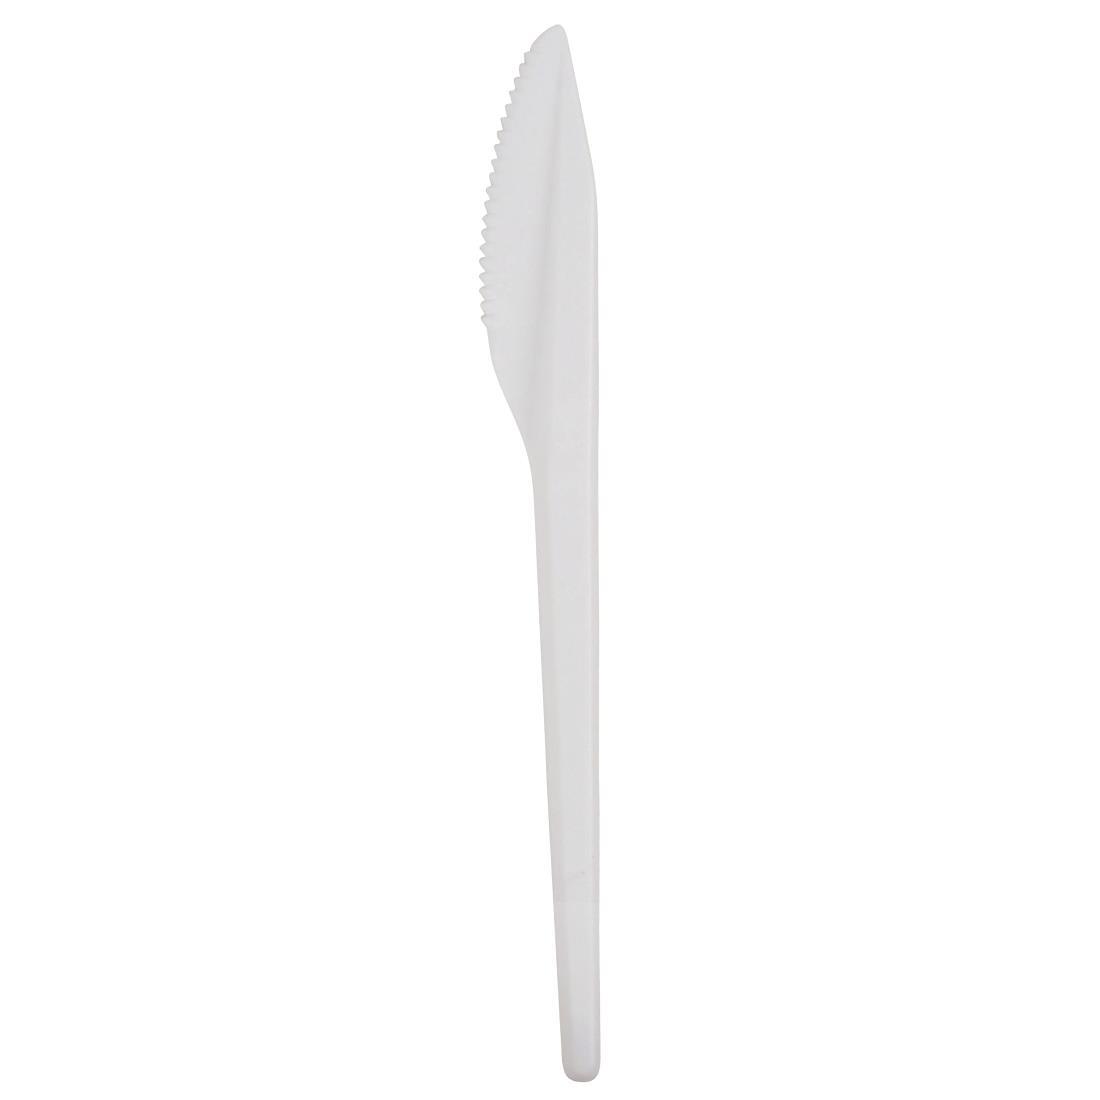 Fiesta Recyclable Plastic Knives White (Pack of 100) - U642  - 2